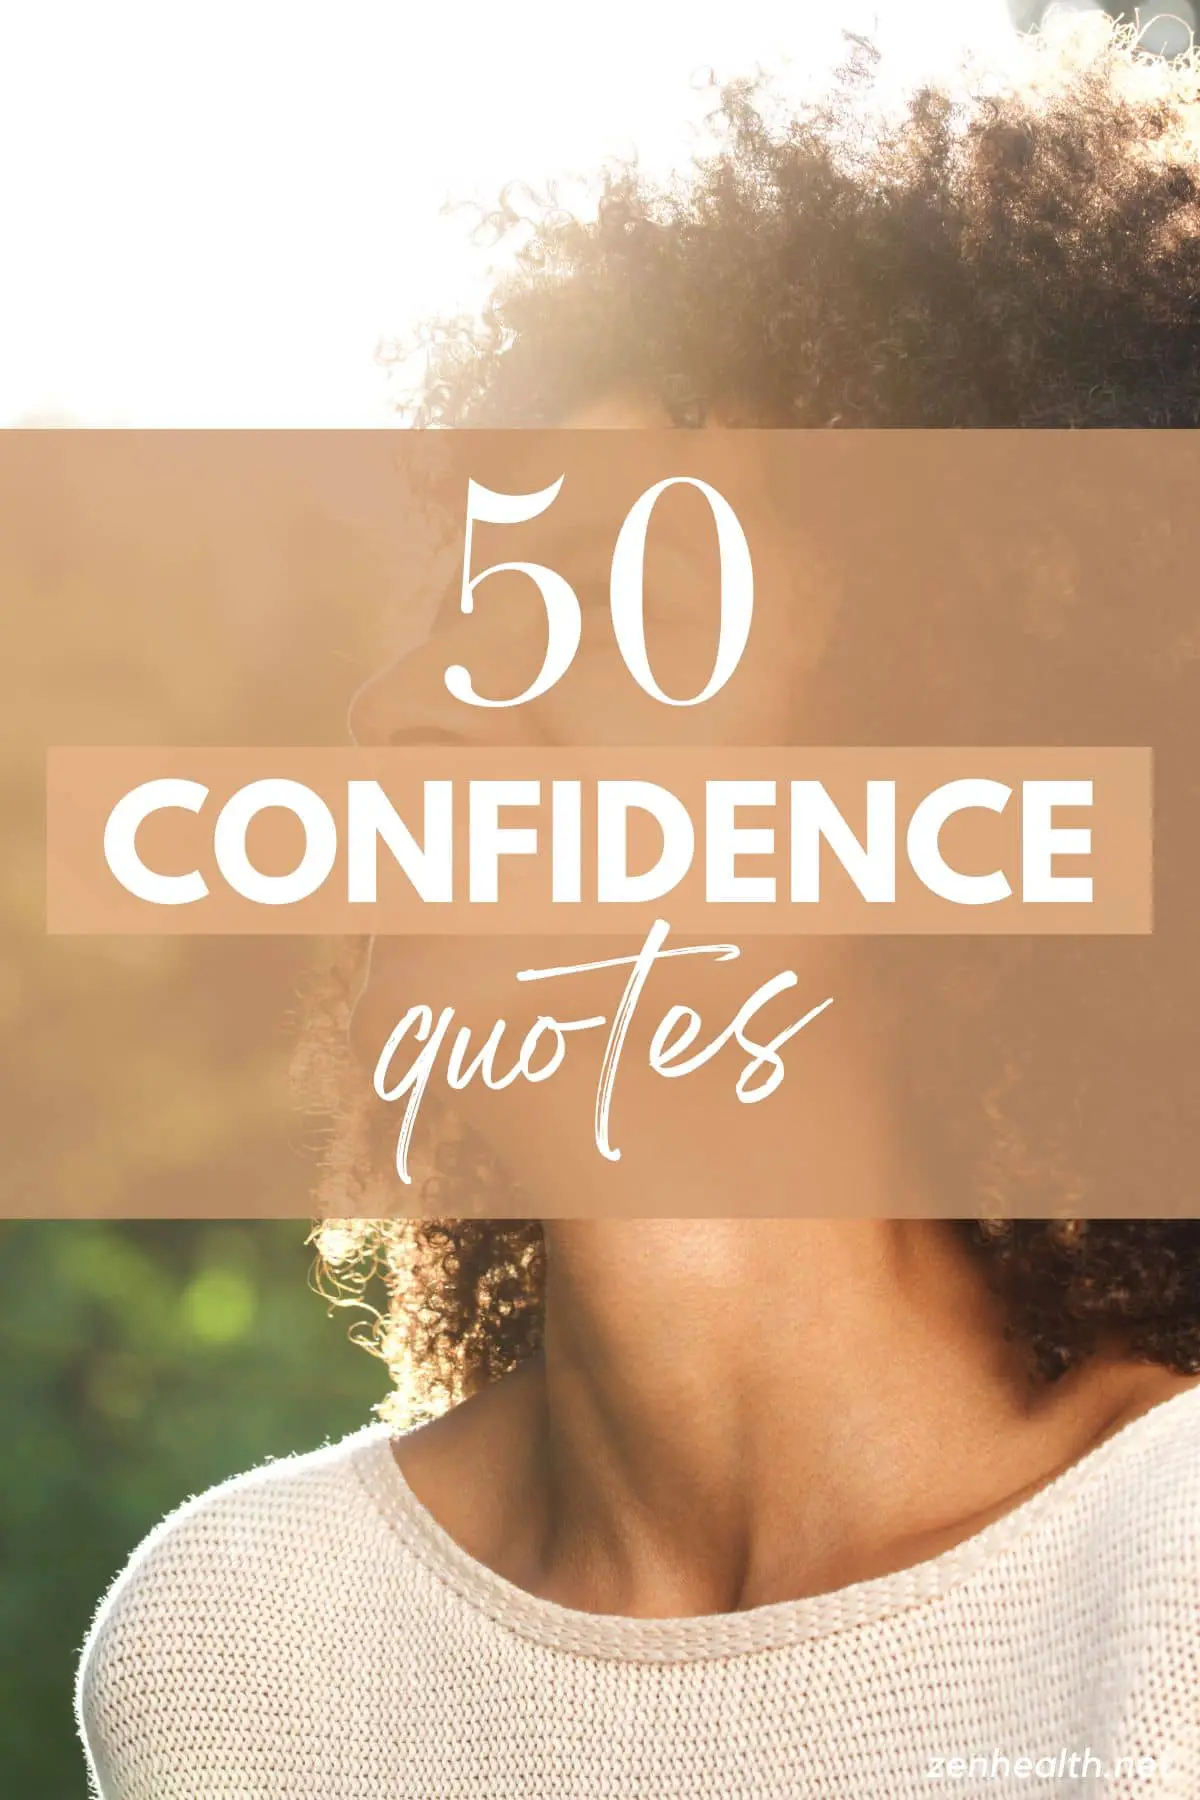 50 confidence quotes text overlay on a woman smiling looking up